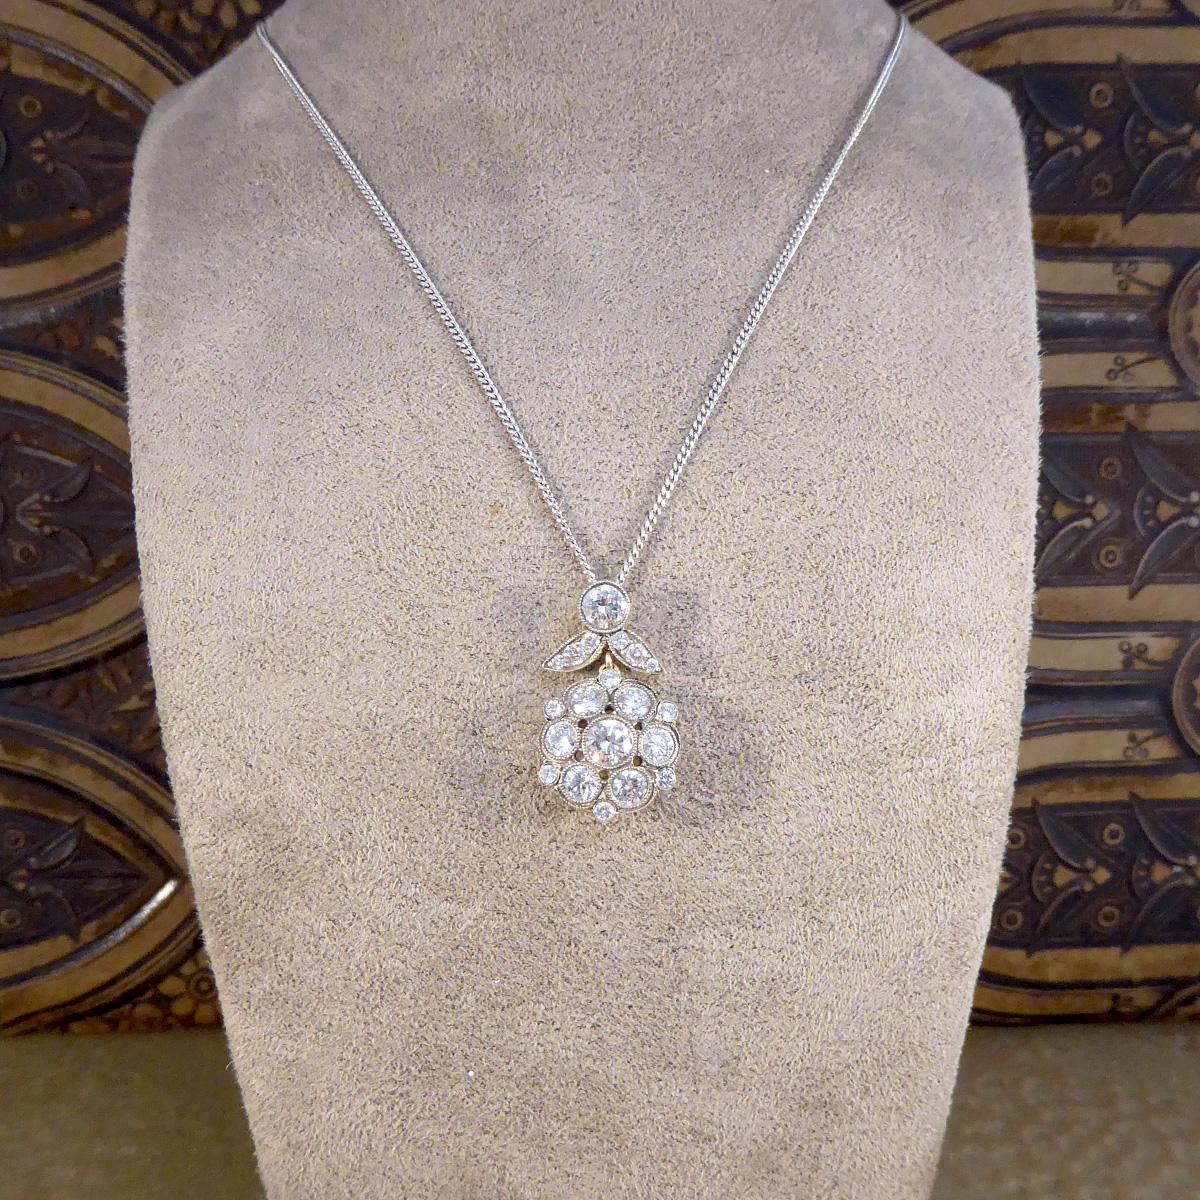 Antique Style 2.50ct Diamond Cluster Drop Pendant Necklace in Gold and Silver In Excellent Condition For Sale In Yorkshire, West Yorkshire